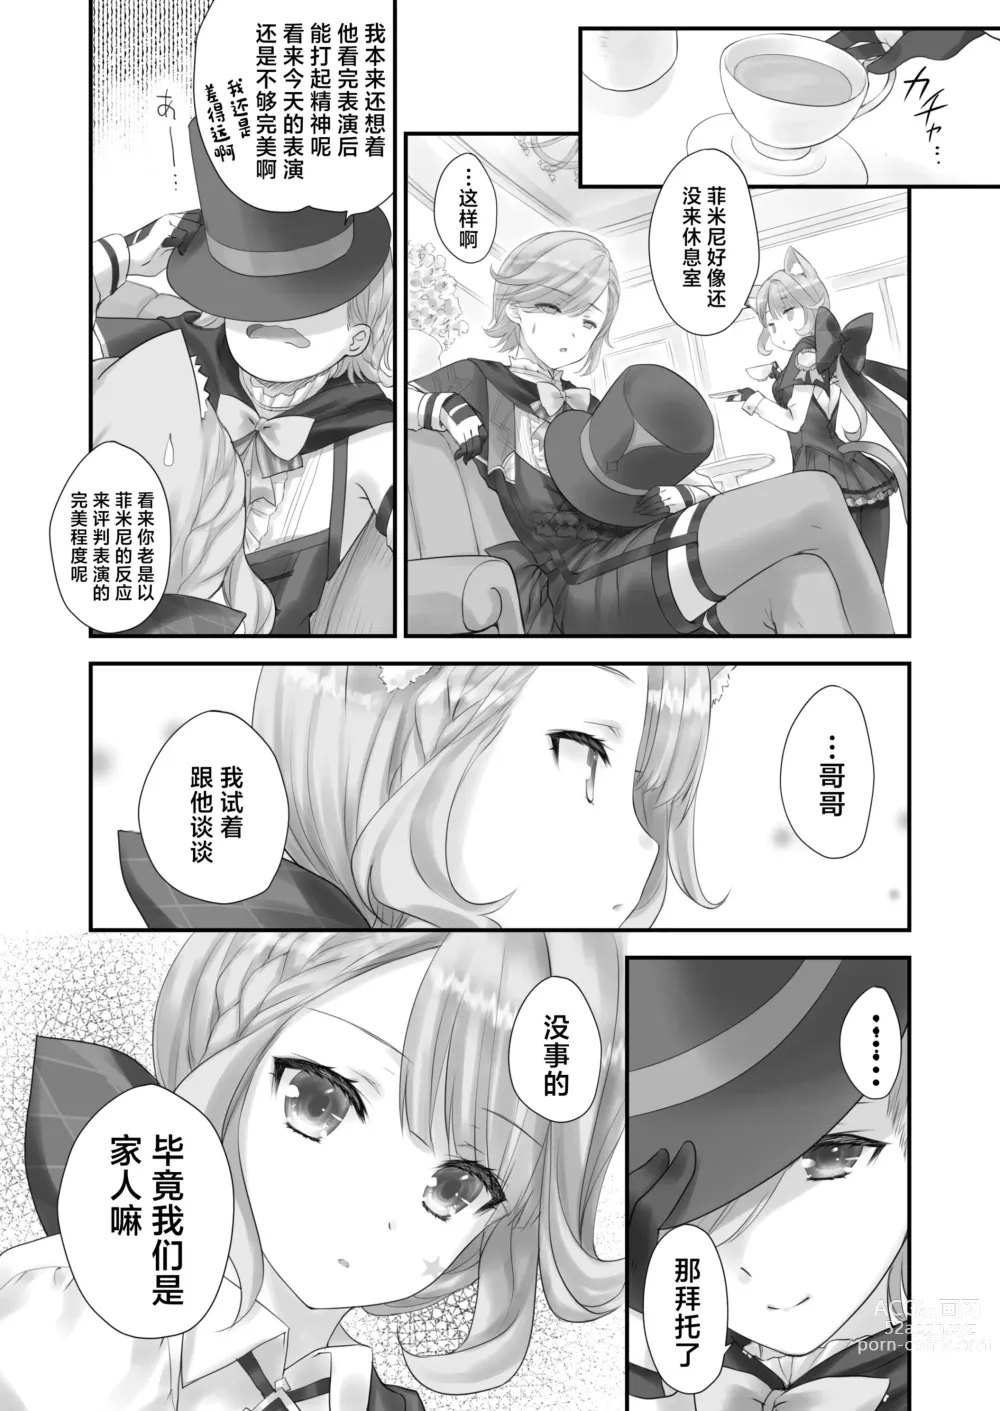 Page 5 of doujinshi Love Marionette Magic